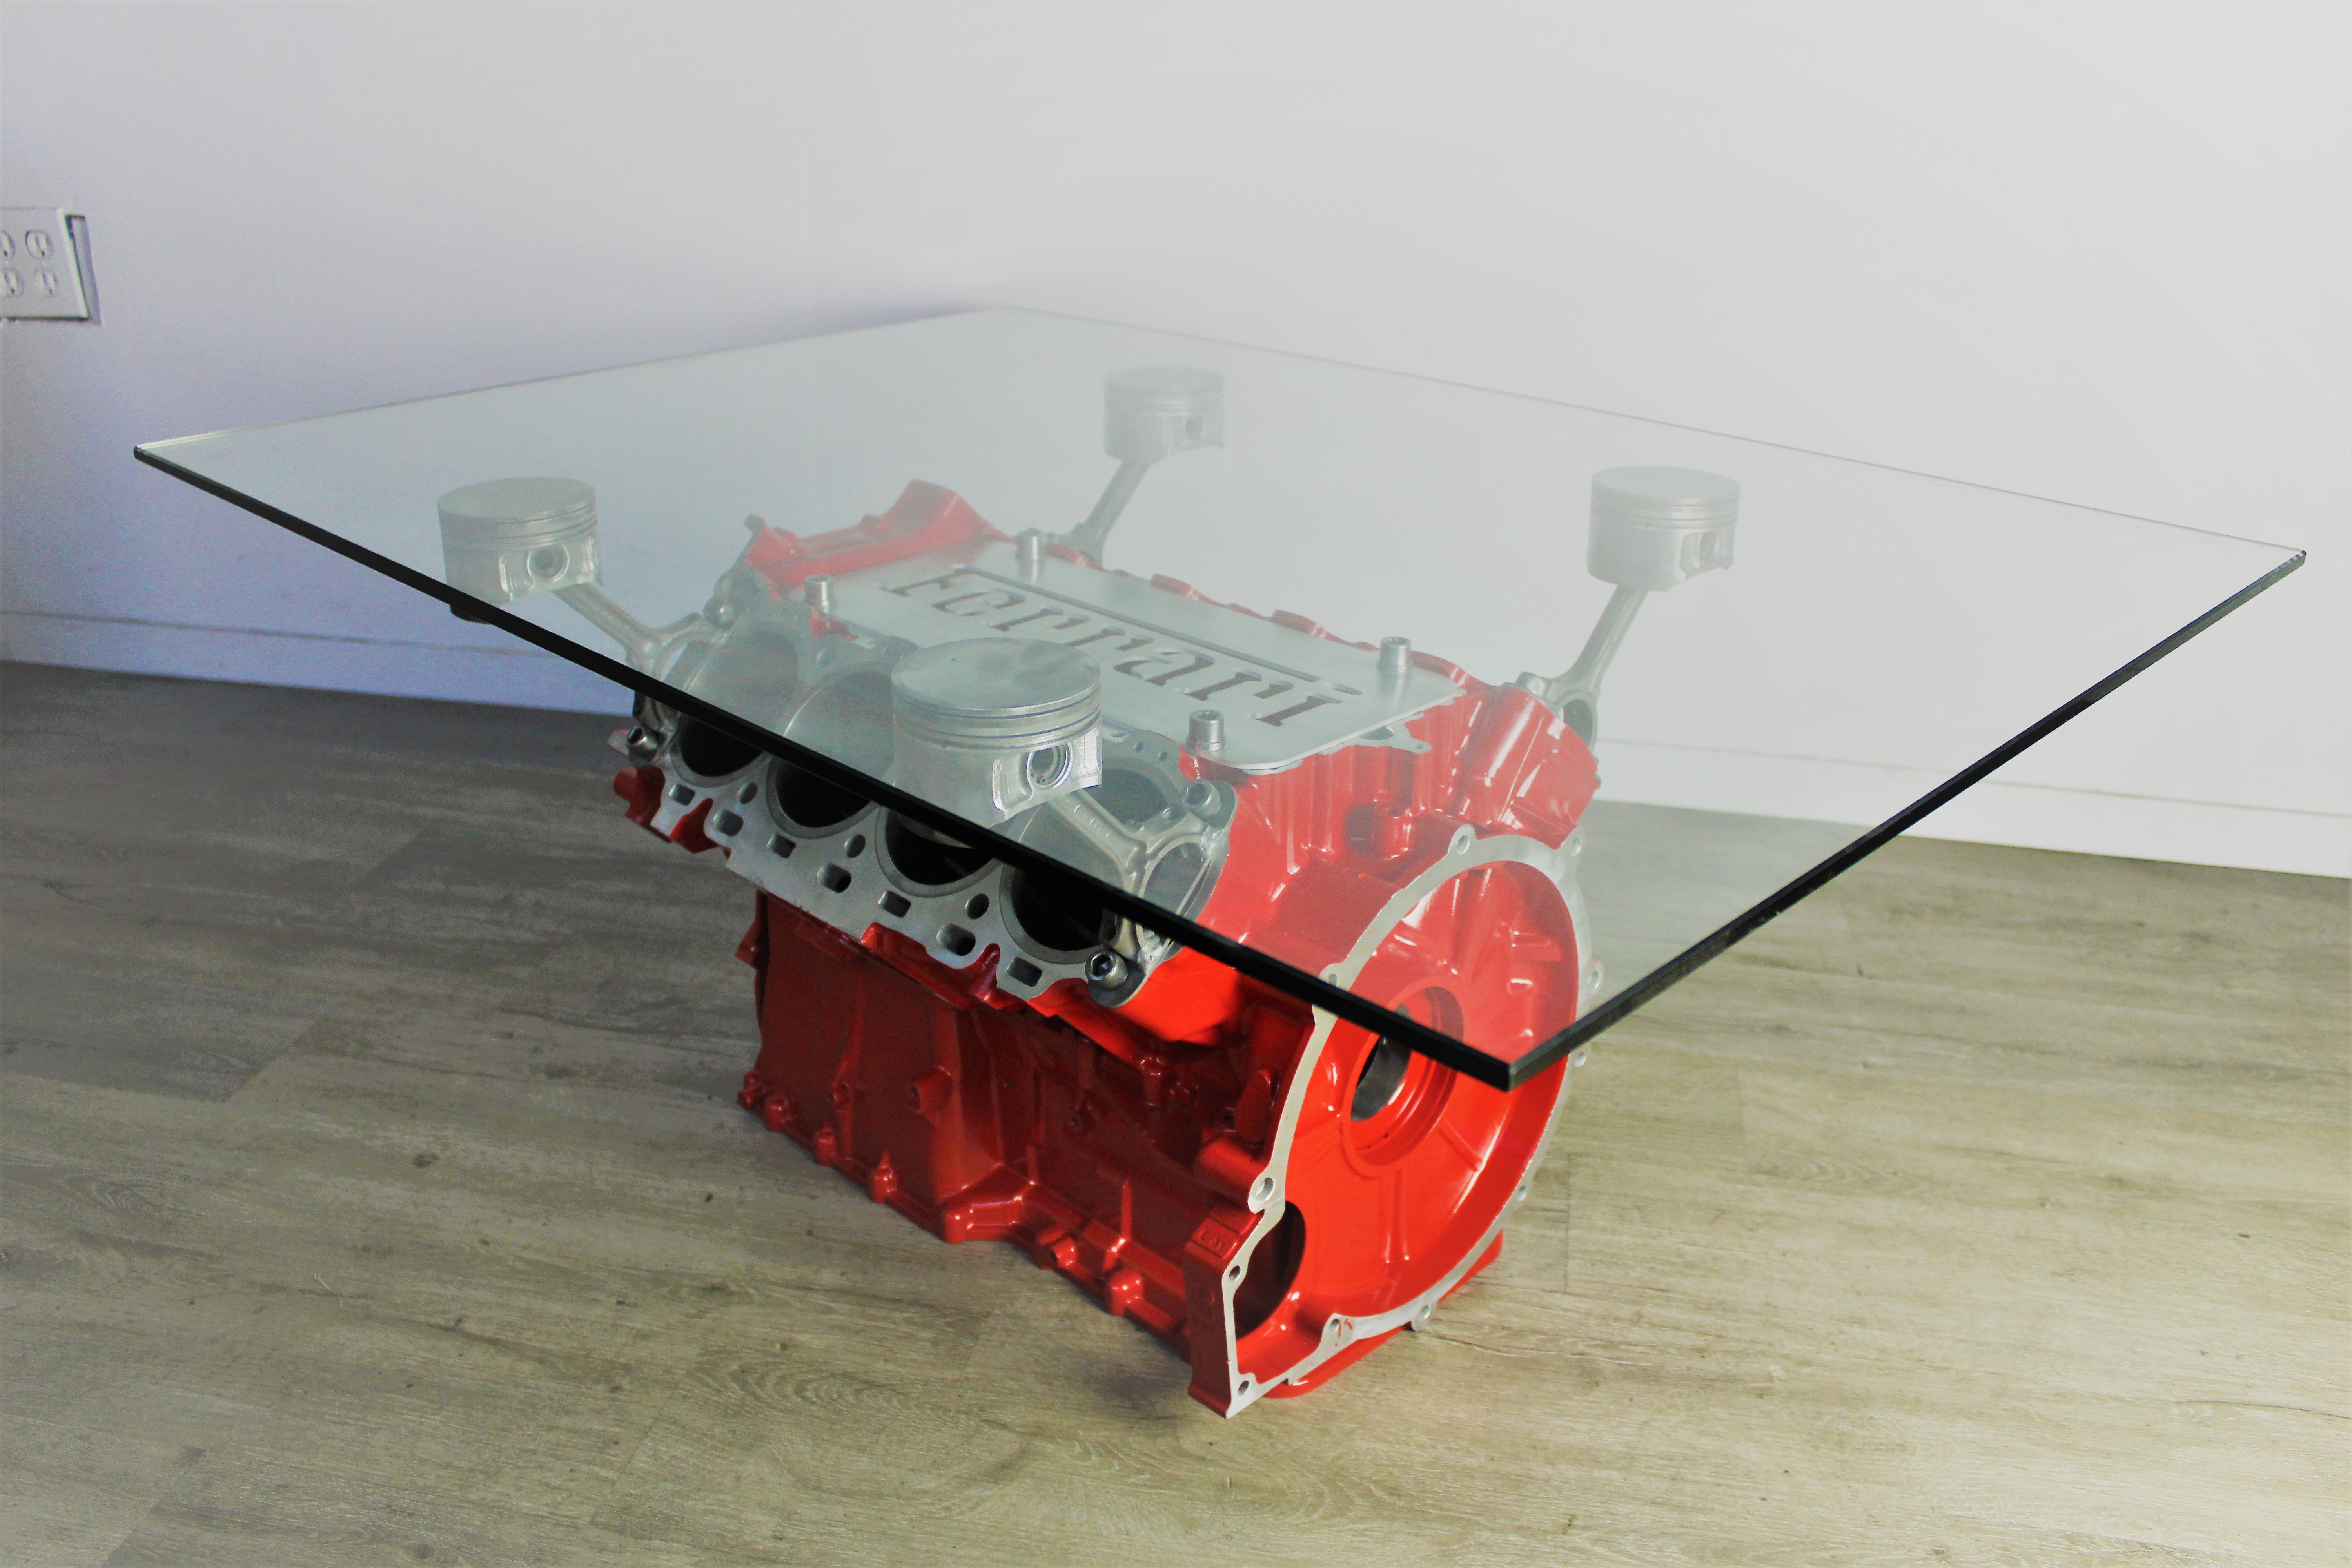 Ferrari engine block coffee table finished in red with a rectangular glass top.